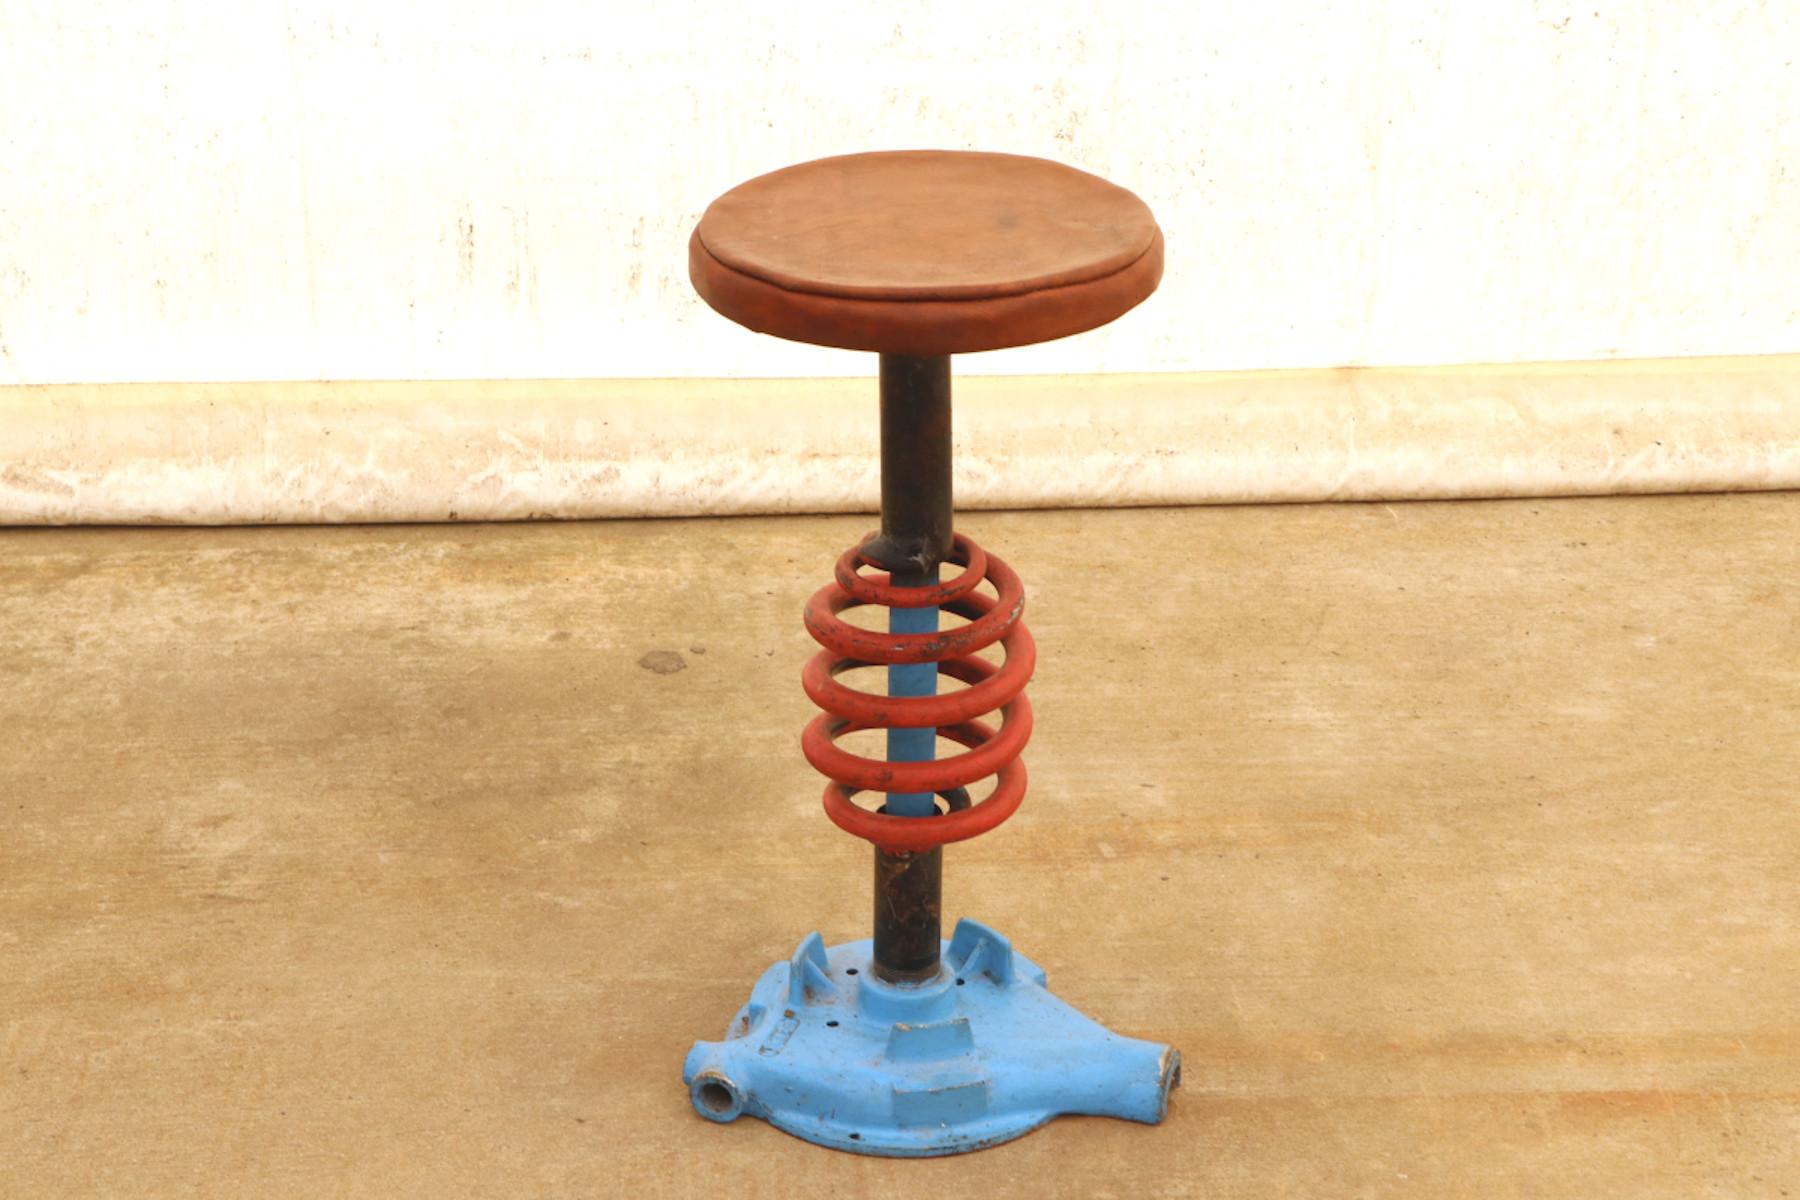 Vintage Eastern Bloc Industrial Stool, 1970s, Czechoslovakia In Good Condition In Prague 8, CZ